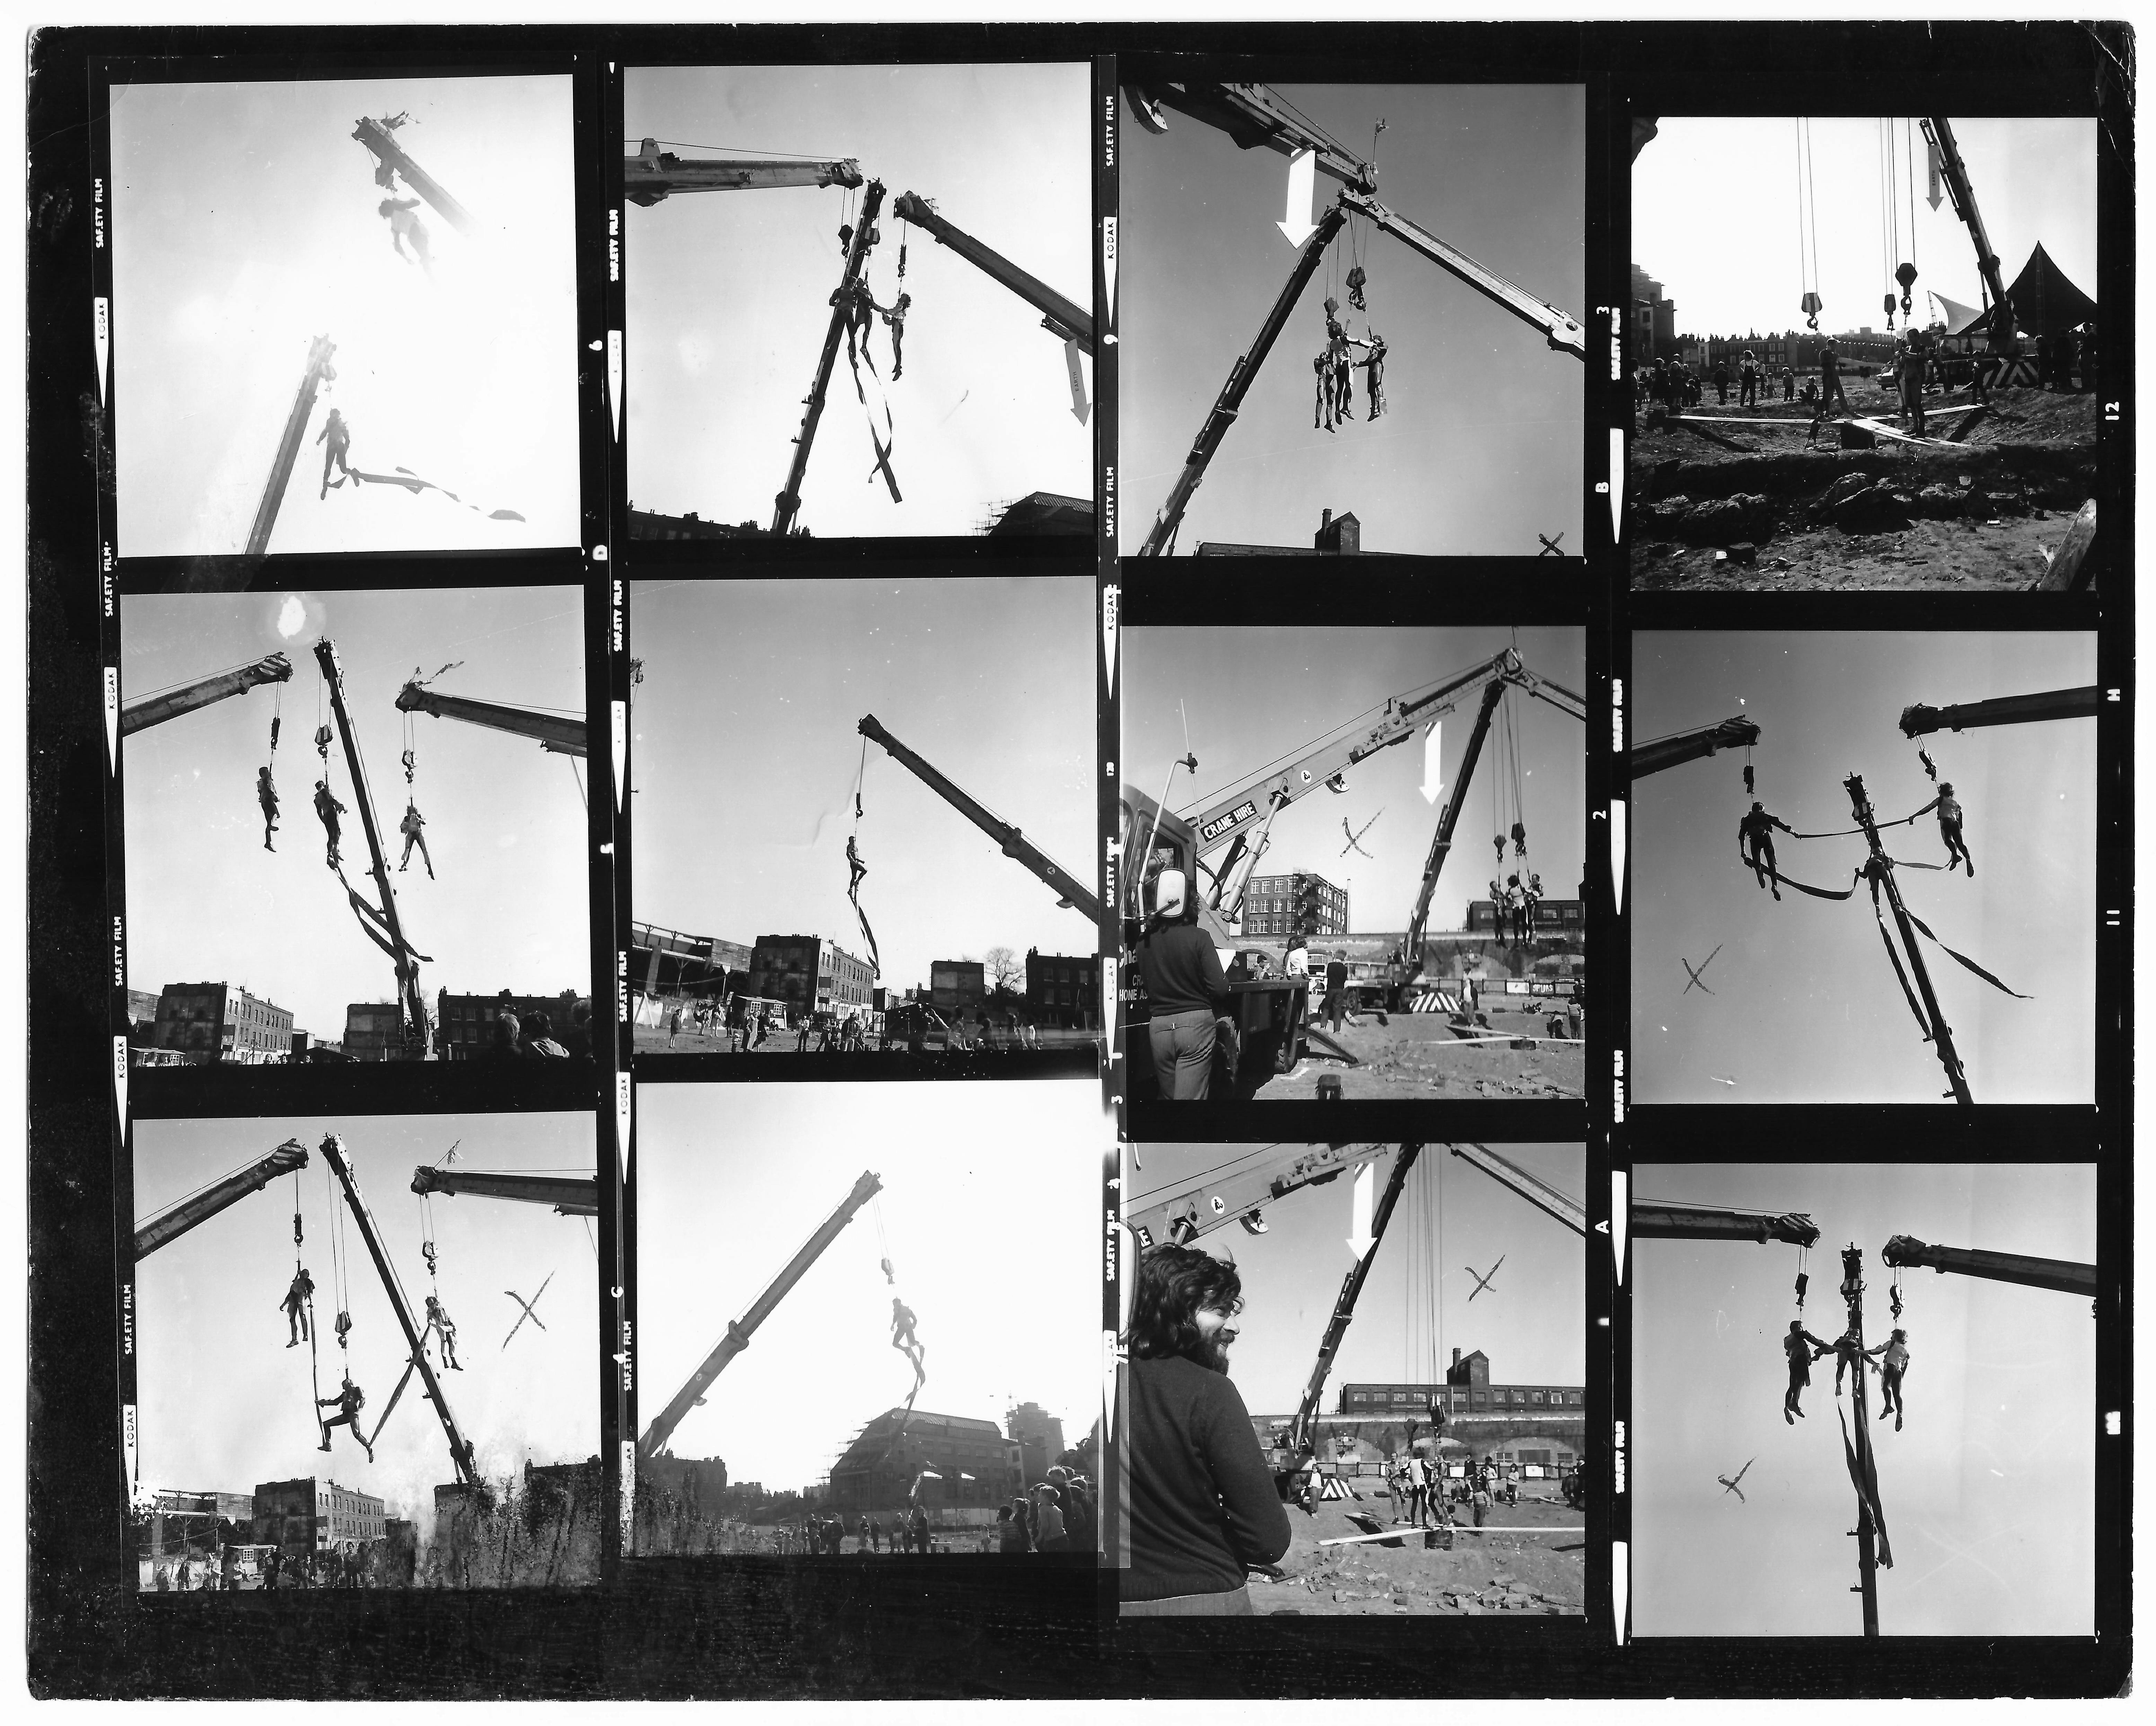 The image is a contact sheet of black-and-white photographs taken during the performance of Leopoldo Maler’s Crane Ballet. The twelve images show three acrobatic performers at various stages of the event. Each performer is harnessed and hoisted from the arm of a crane, occasionally interacting with the others by holding hands or grabbing onto long ribbons hanging from their harnesses. In several images, a large white arrow, pointing down, is seen affixed to the lower portion of one of the crane arms. In a lower image, center-right, the event is seen over the shoulder of Maler, a smiling, bearded man in a sweater.